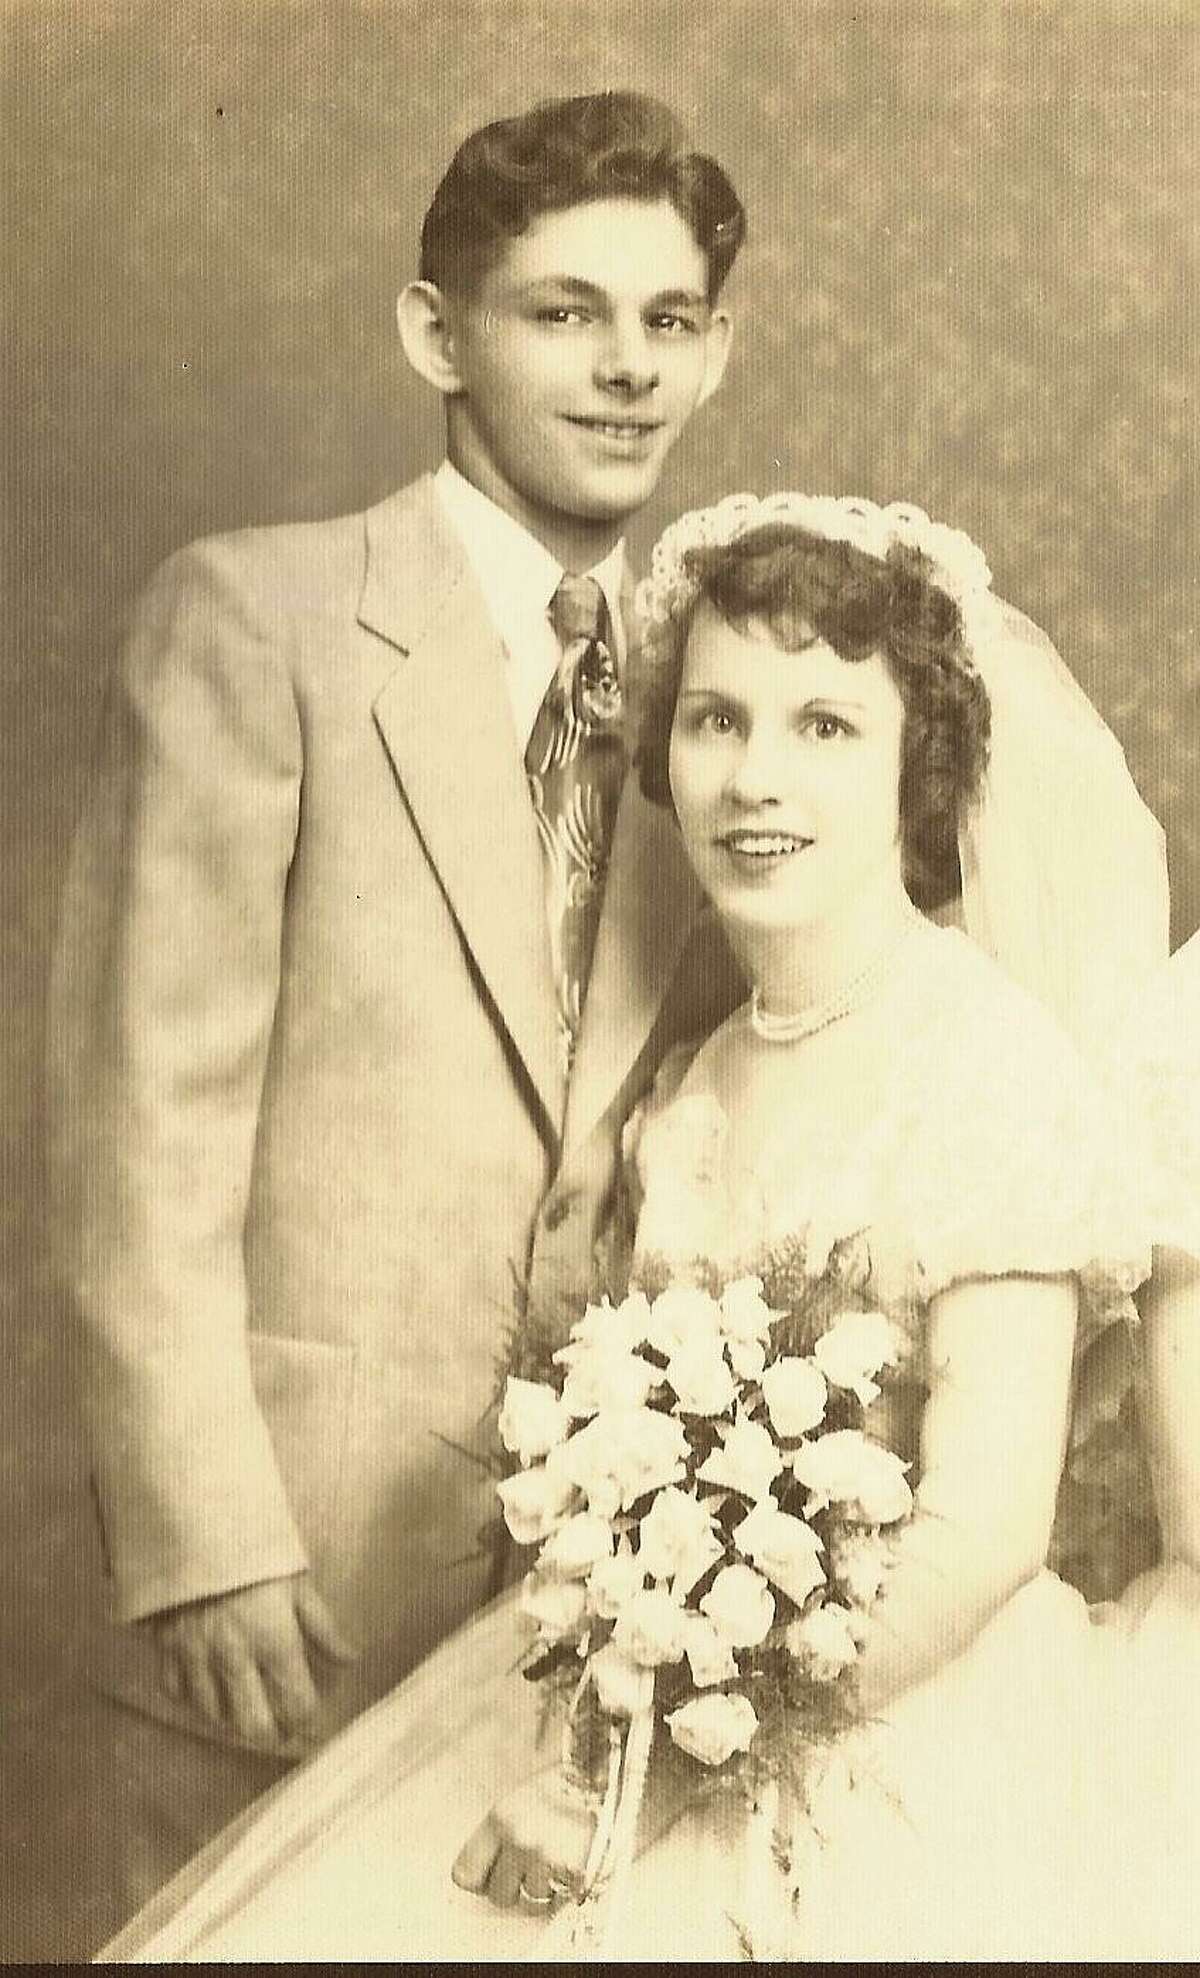 Louis and Geraldine (Russell) Didato will celebrate their 65th wedding anniversary on April 6.